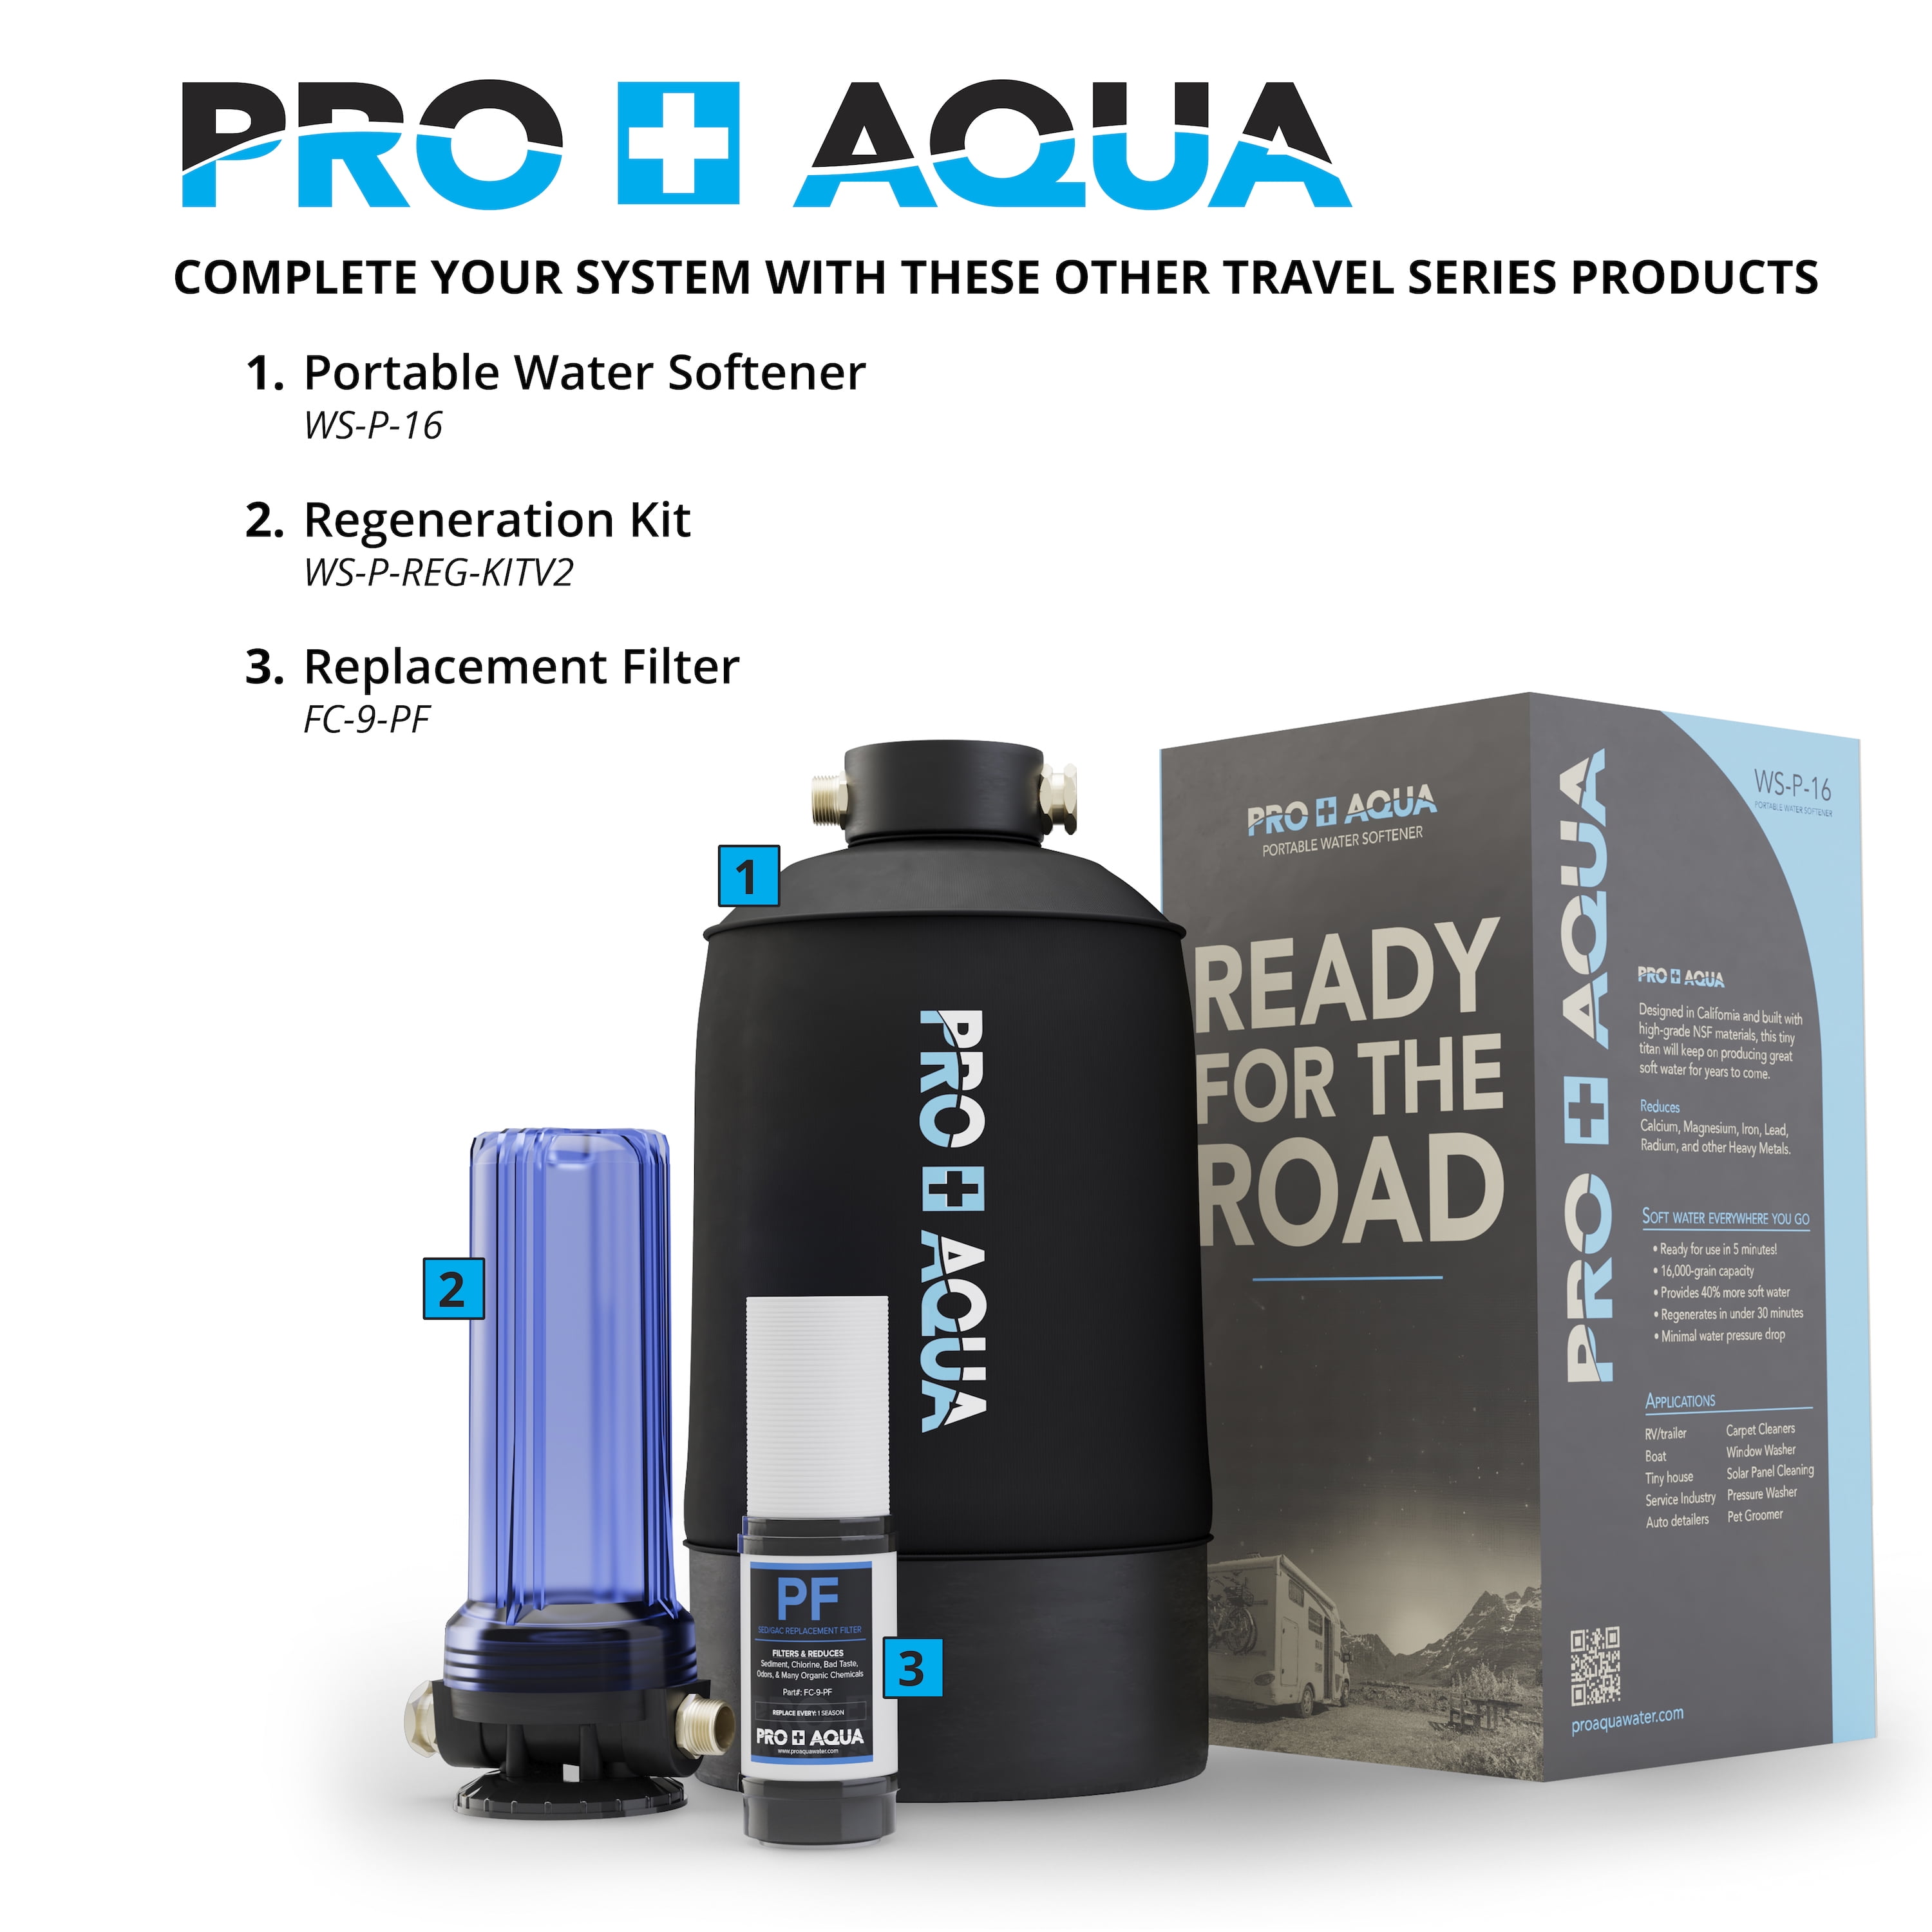 PRO+AQUA RV Water Filter and Portable Water Softener Regeneration Kit - 5  Micron Filtration, Anti-Corrosion Brass Fittings, Transparent Housing,  Filters Chlorine, Bad Taste, Odors, Sediment, Bacteria